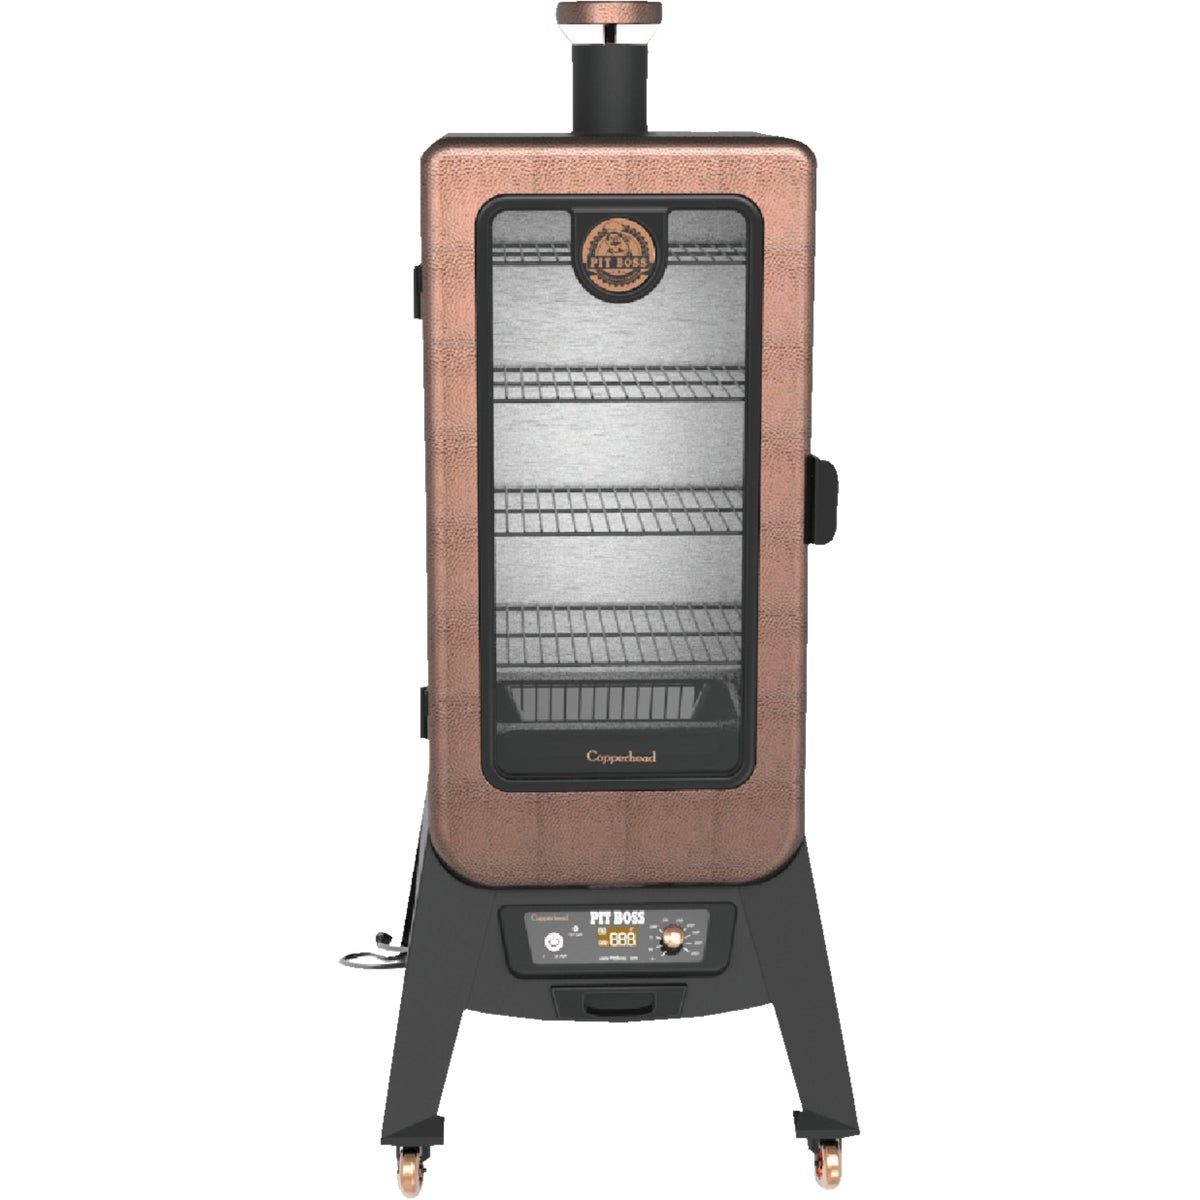 Item 800025, Pit Boss Pellet Smoker Copperhead Series has double walled insulation that 